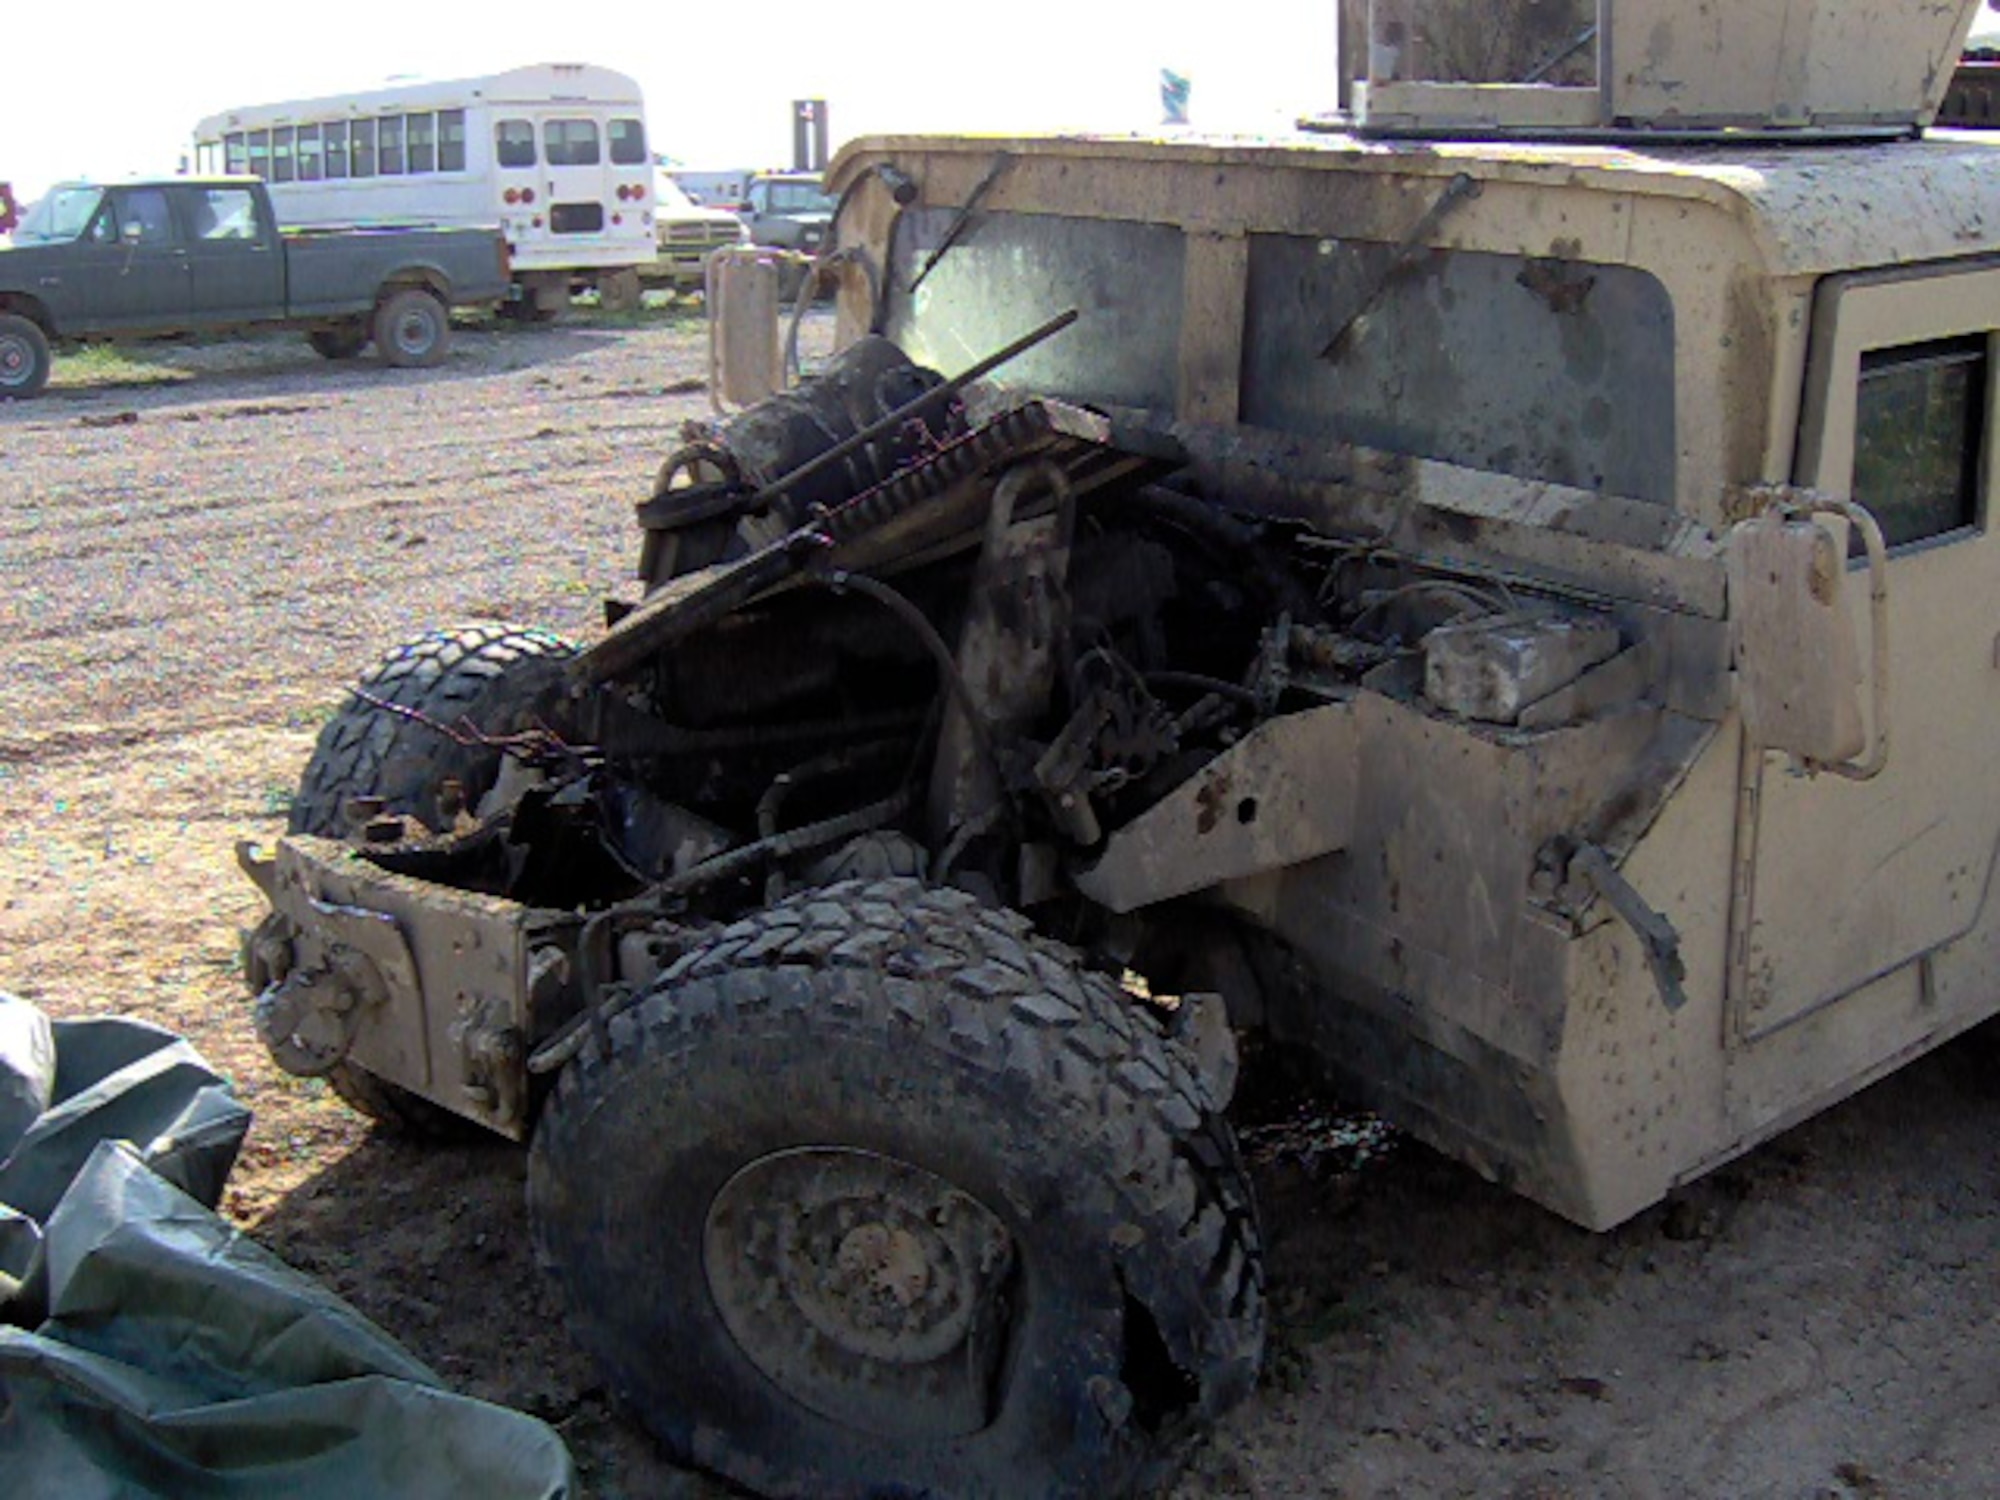 This Humvee drove over a pressure-plated improvised explosive device in Iraq March 19, 2005, with four Airmen inside. The IED detonated underneath the left front tire, blowing up the engine and hurling the vehicle and its passengers, including Tech. Sgt. Kellen Grogan, 10 feet in the air and 15 feet forward. All passengers survived the explosion. (courtesy photo) 